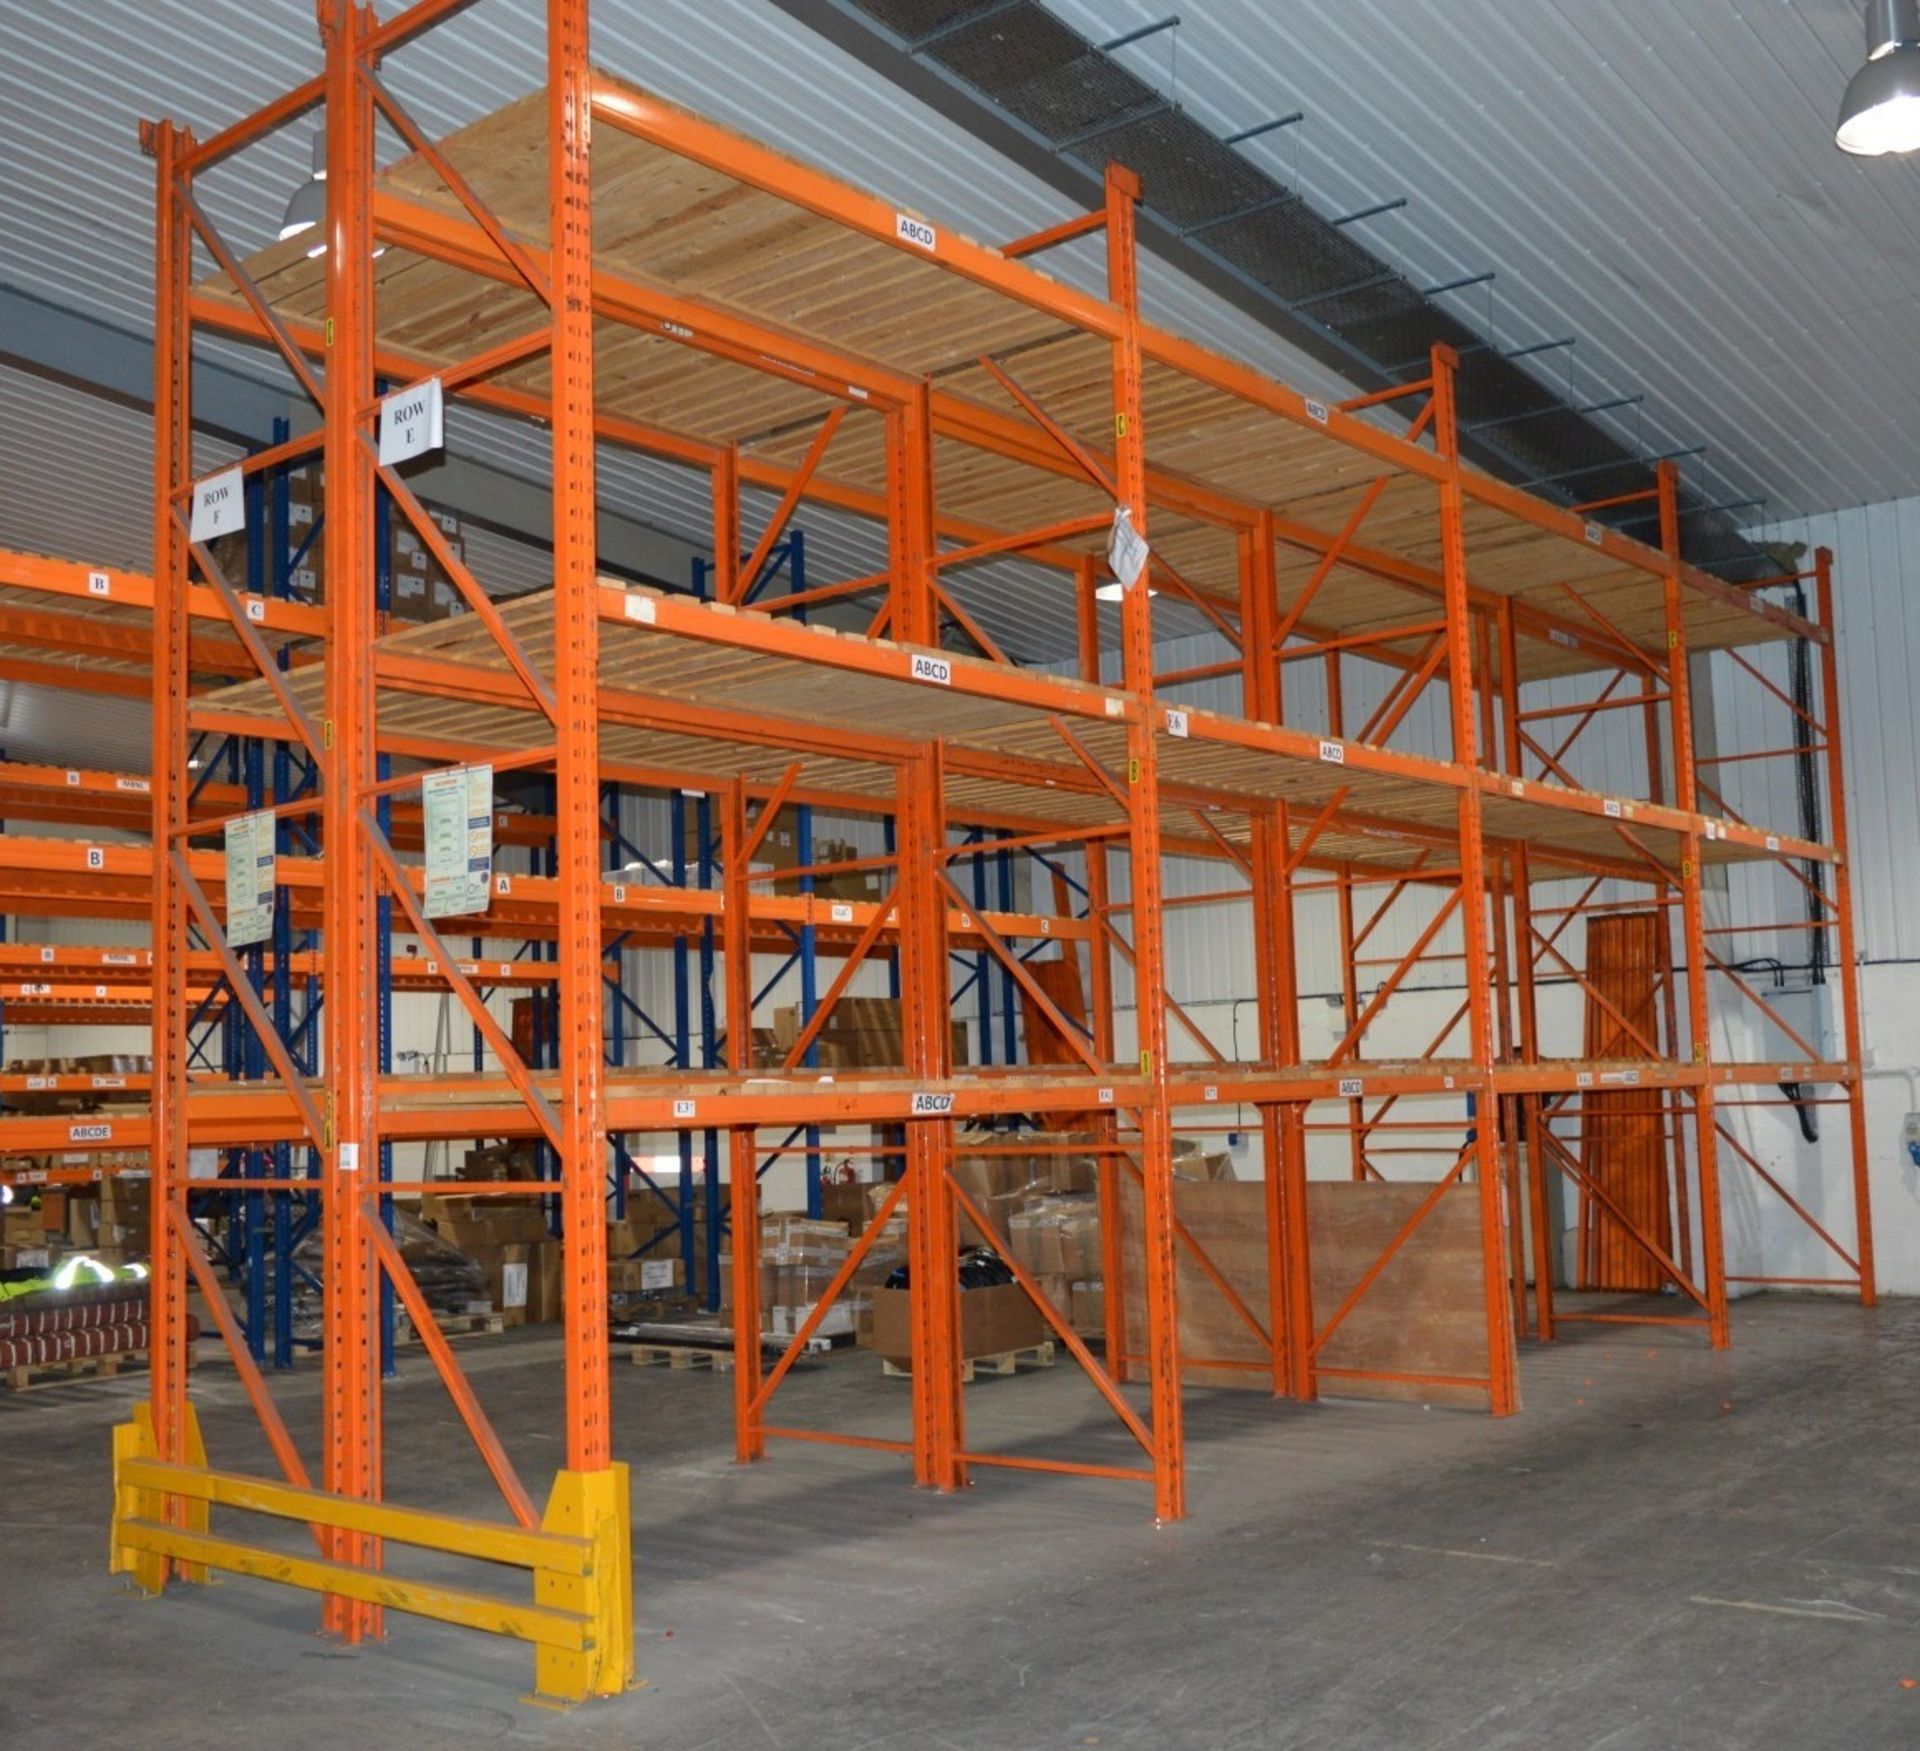 8 x Bays of Warehouse PALLET RACKING - Lot Includes 110 x Uprights, 56 x Crossbeams, 1 x - Image 3 of 9